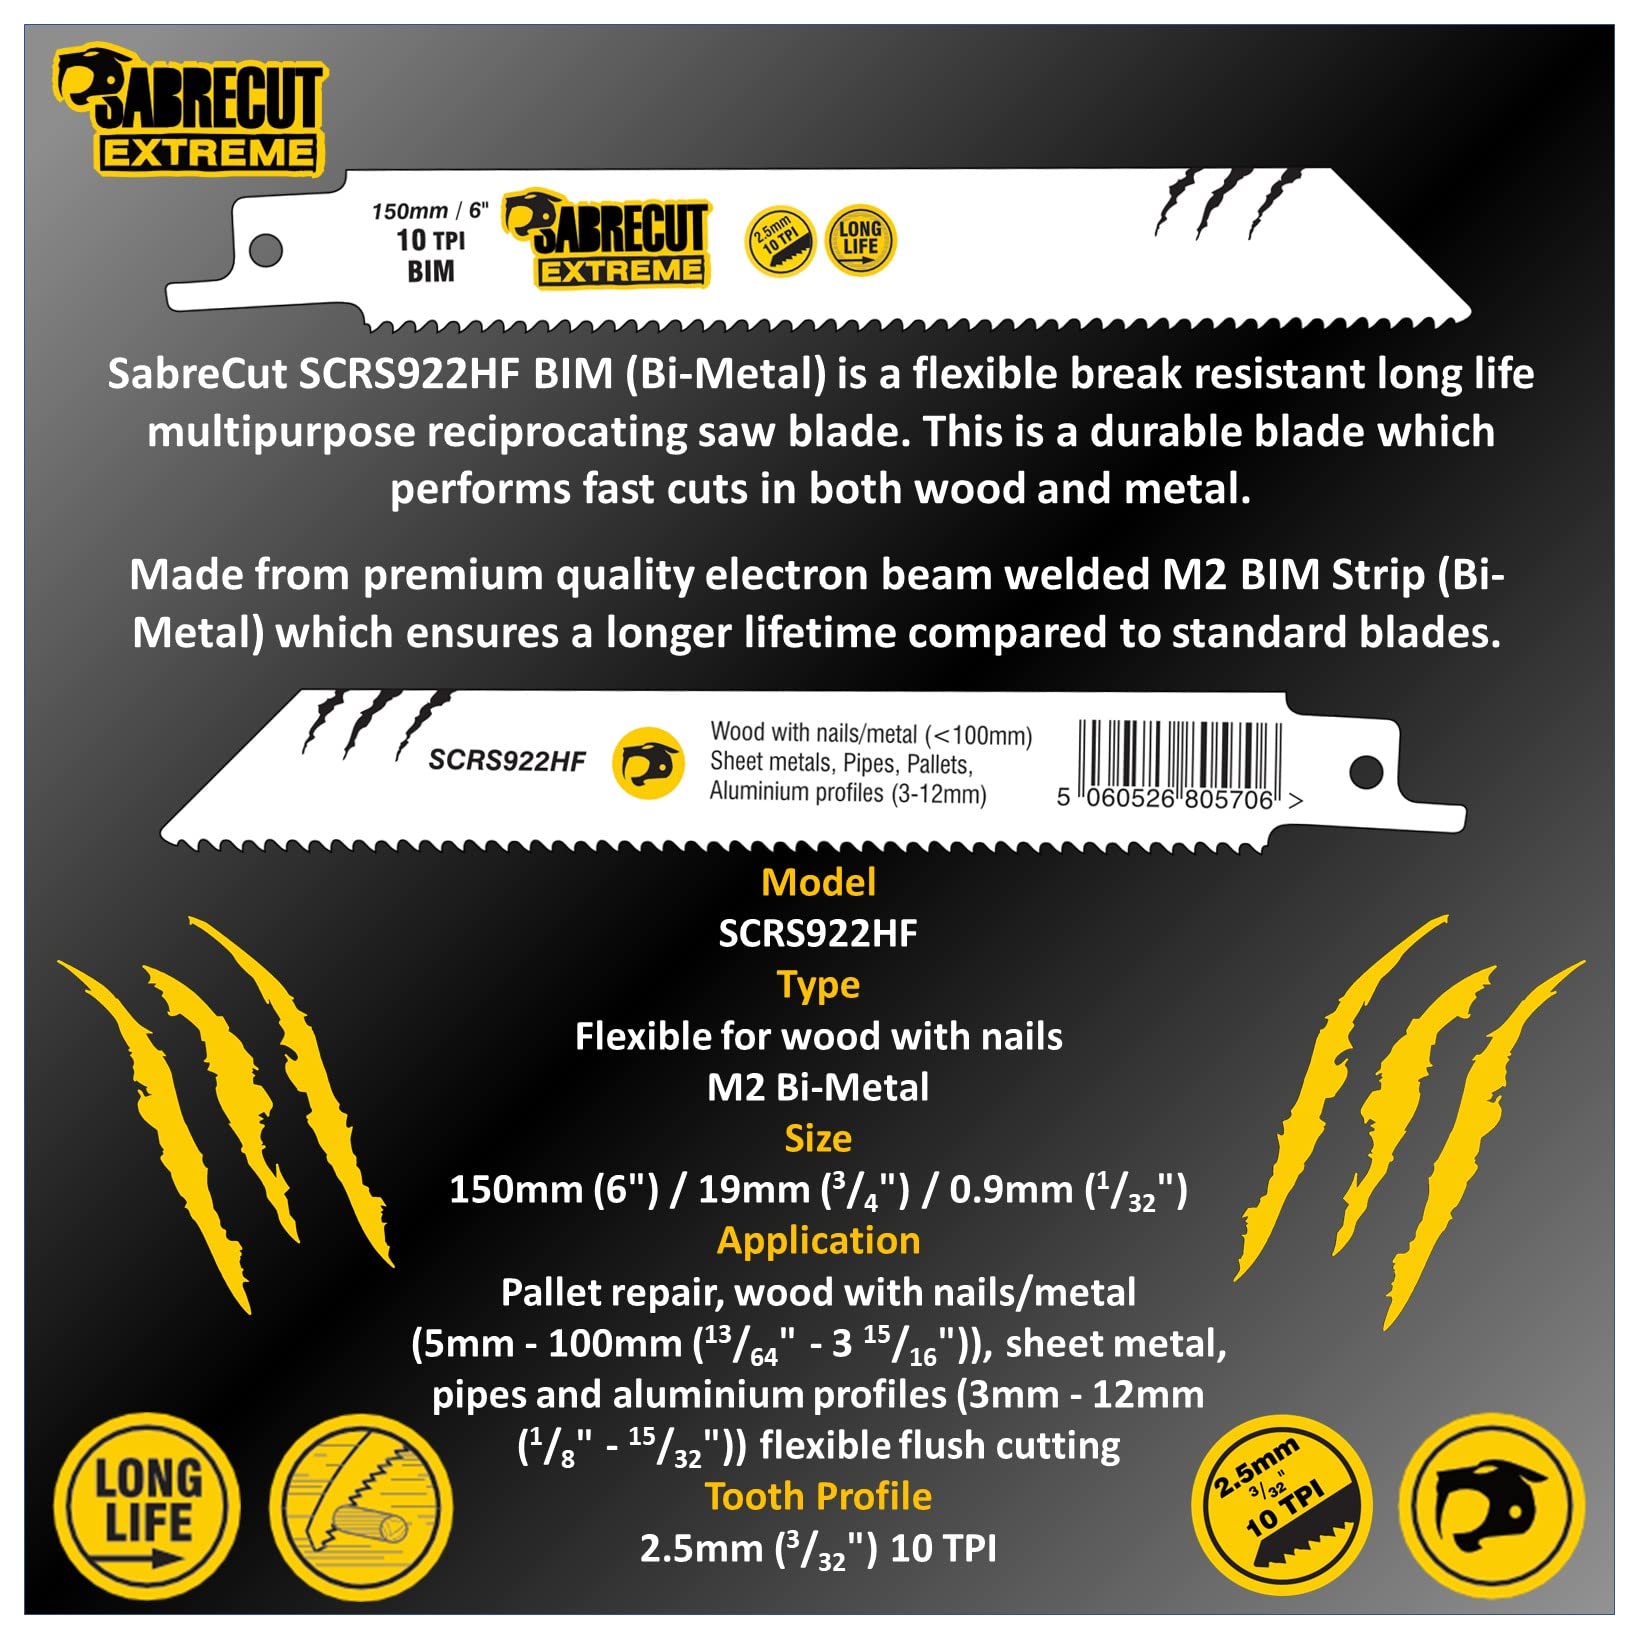 10 x SabreCut SCRS922HF_10 5 15/16" (150mm) 10 TPI S922HF Fast Wood and Metal Cutting Reciprocating Sabre Saw Blades Compatible with Bosch Dewalt Makita and many others